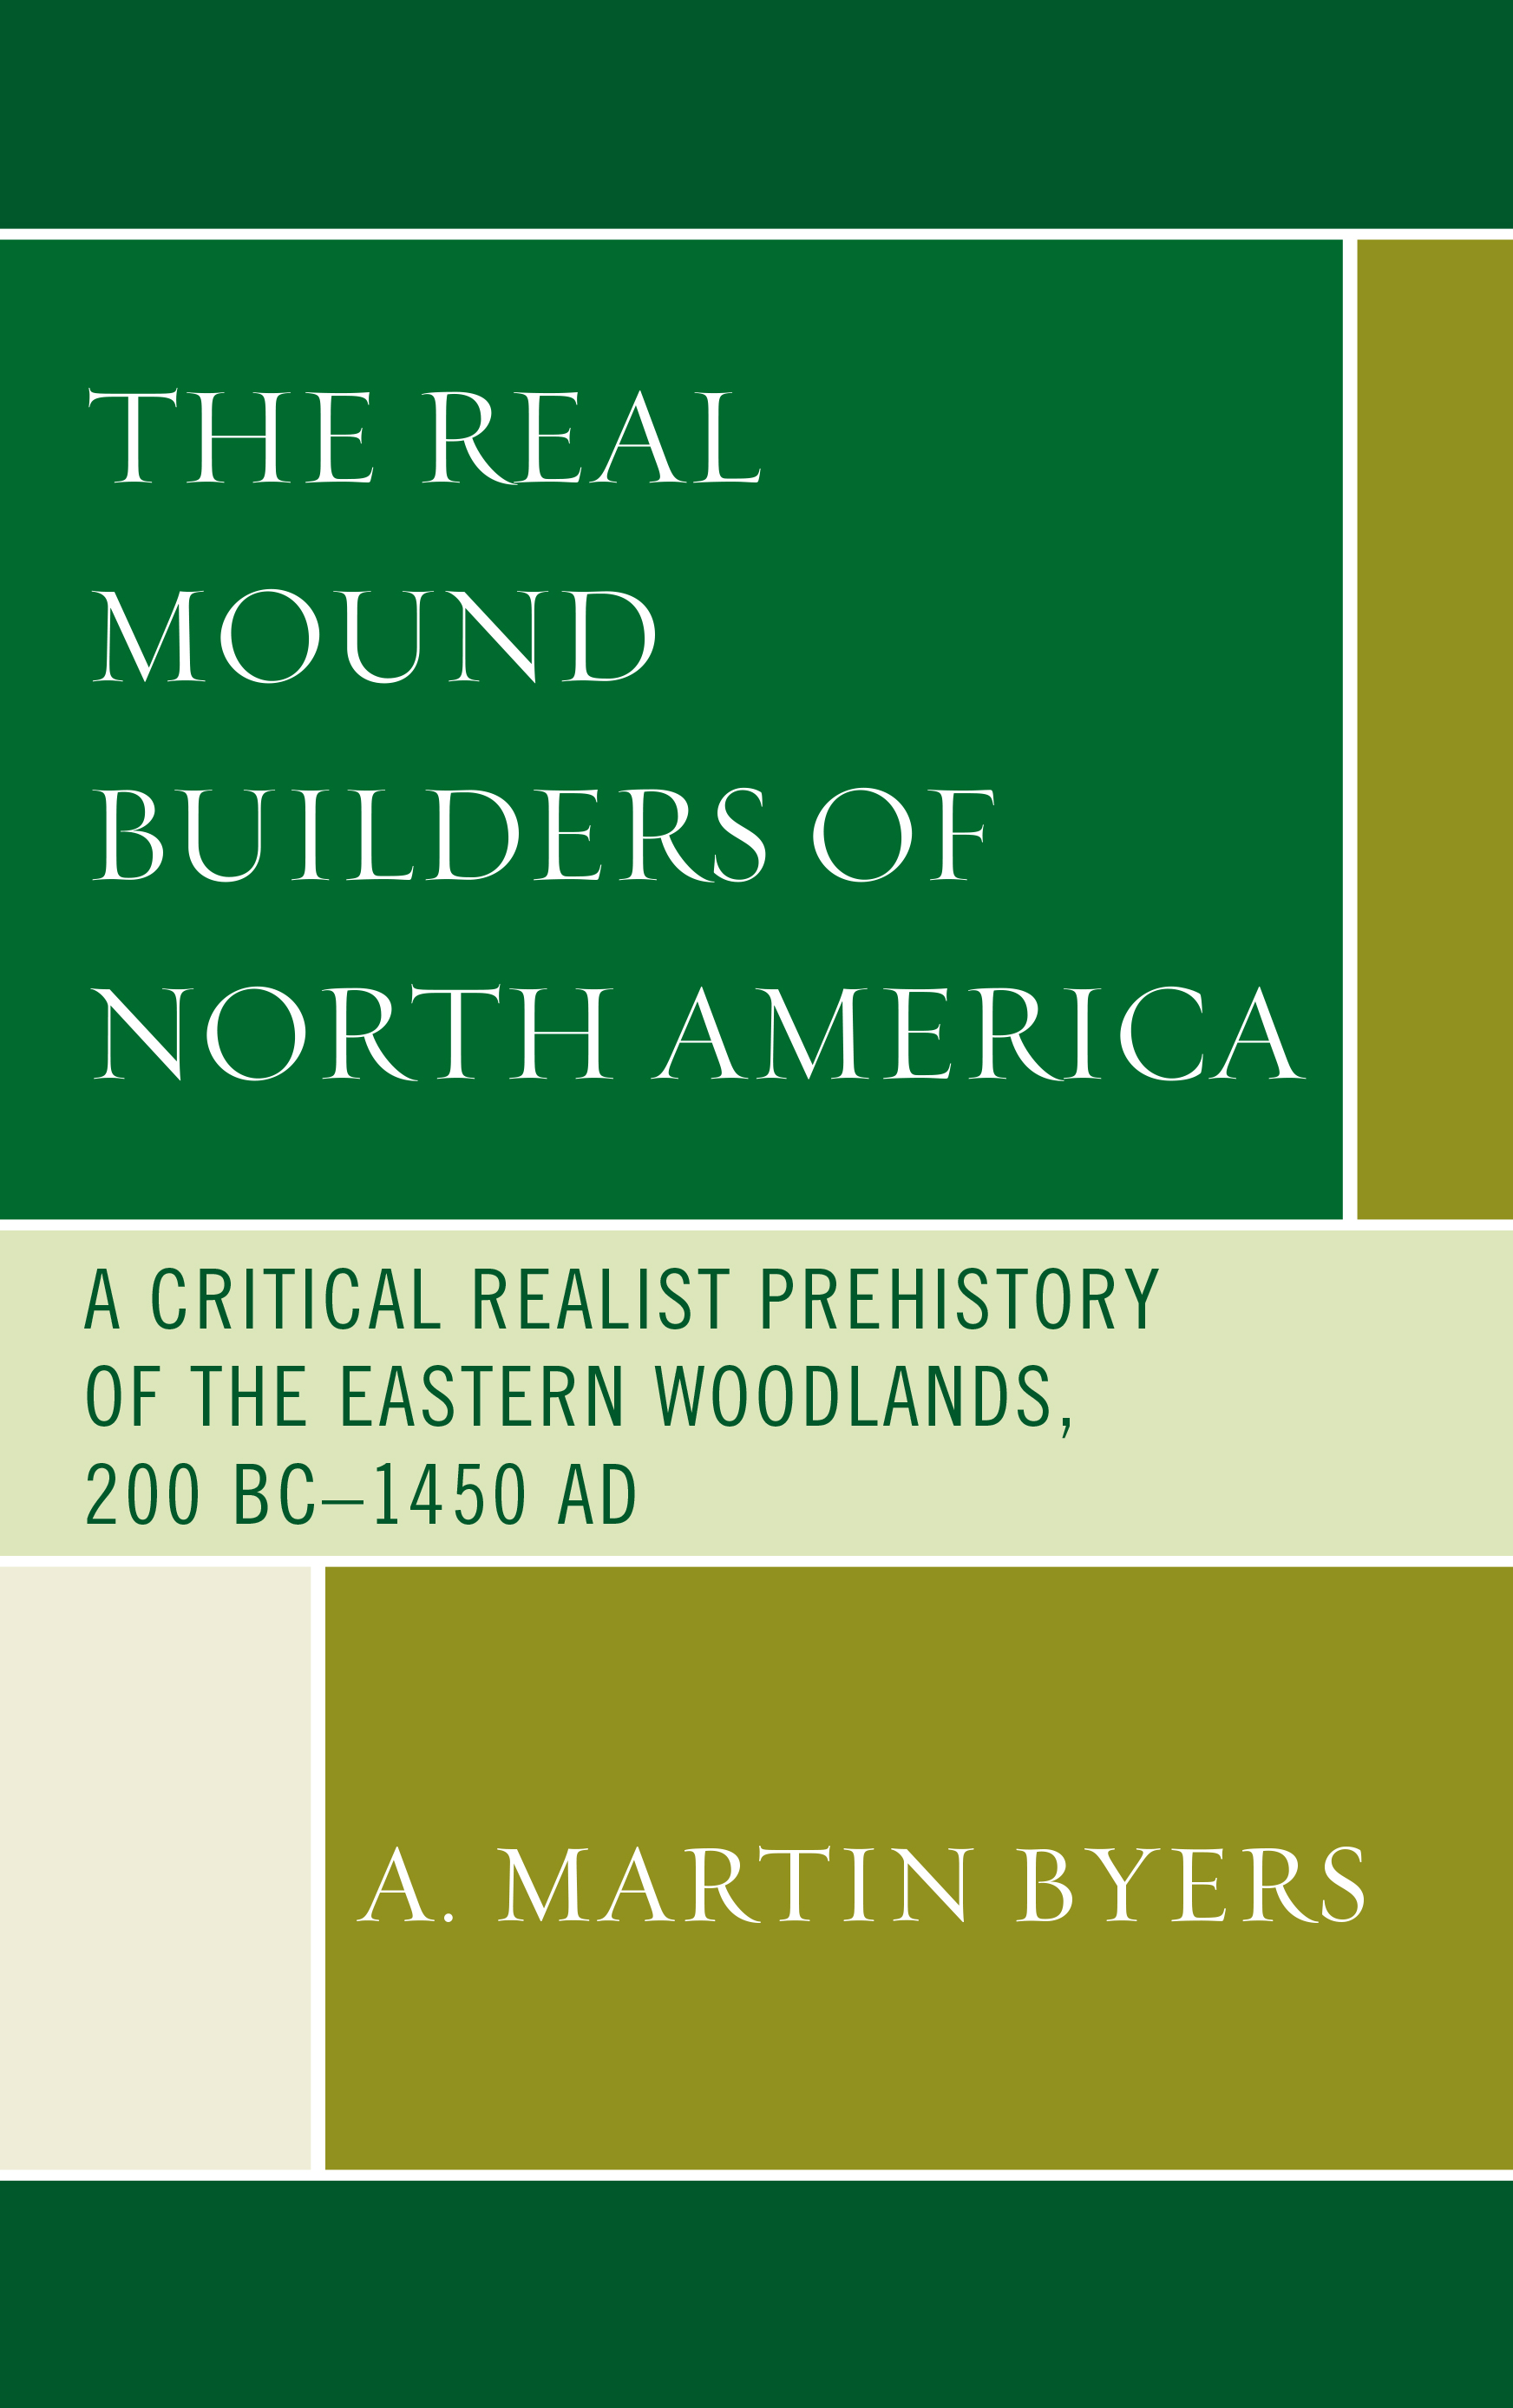 A Critical Realist Prehistory of the Eastern Woodlands, 200 BC–1450 AD